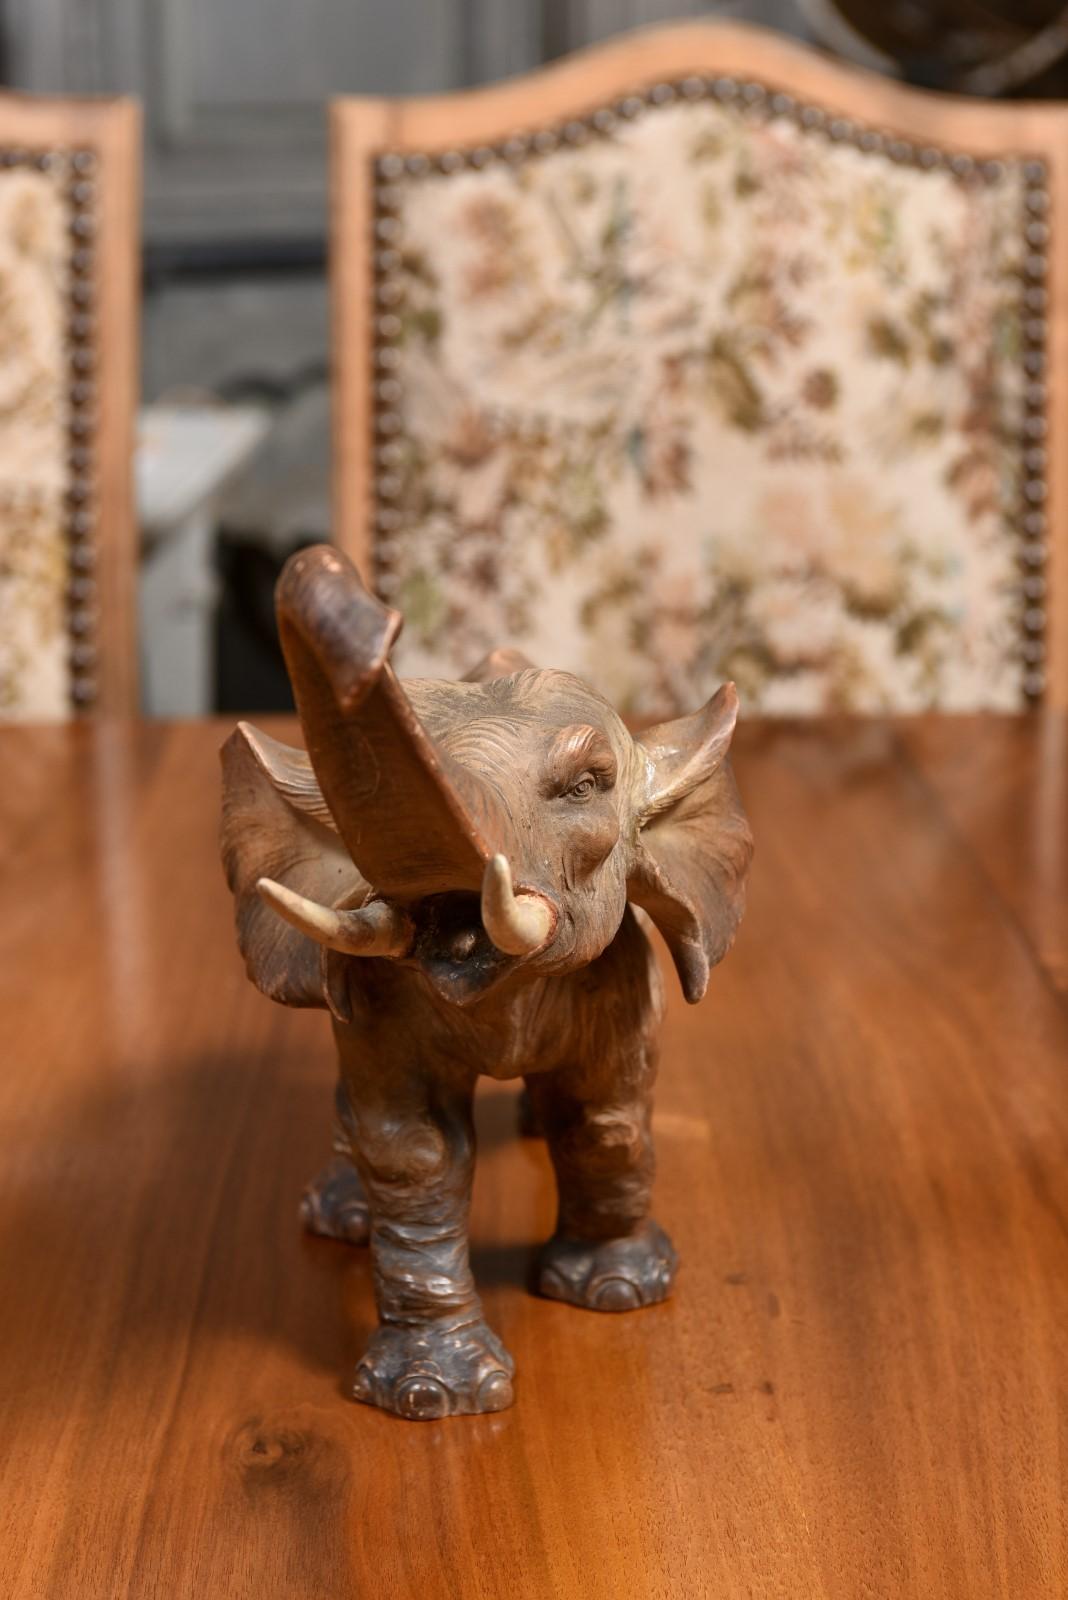 French 19th Century Terracotta Sculpture Depicting a Walking Asian Elephant For Sale 7